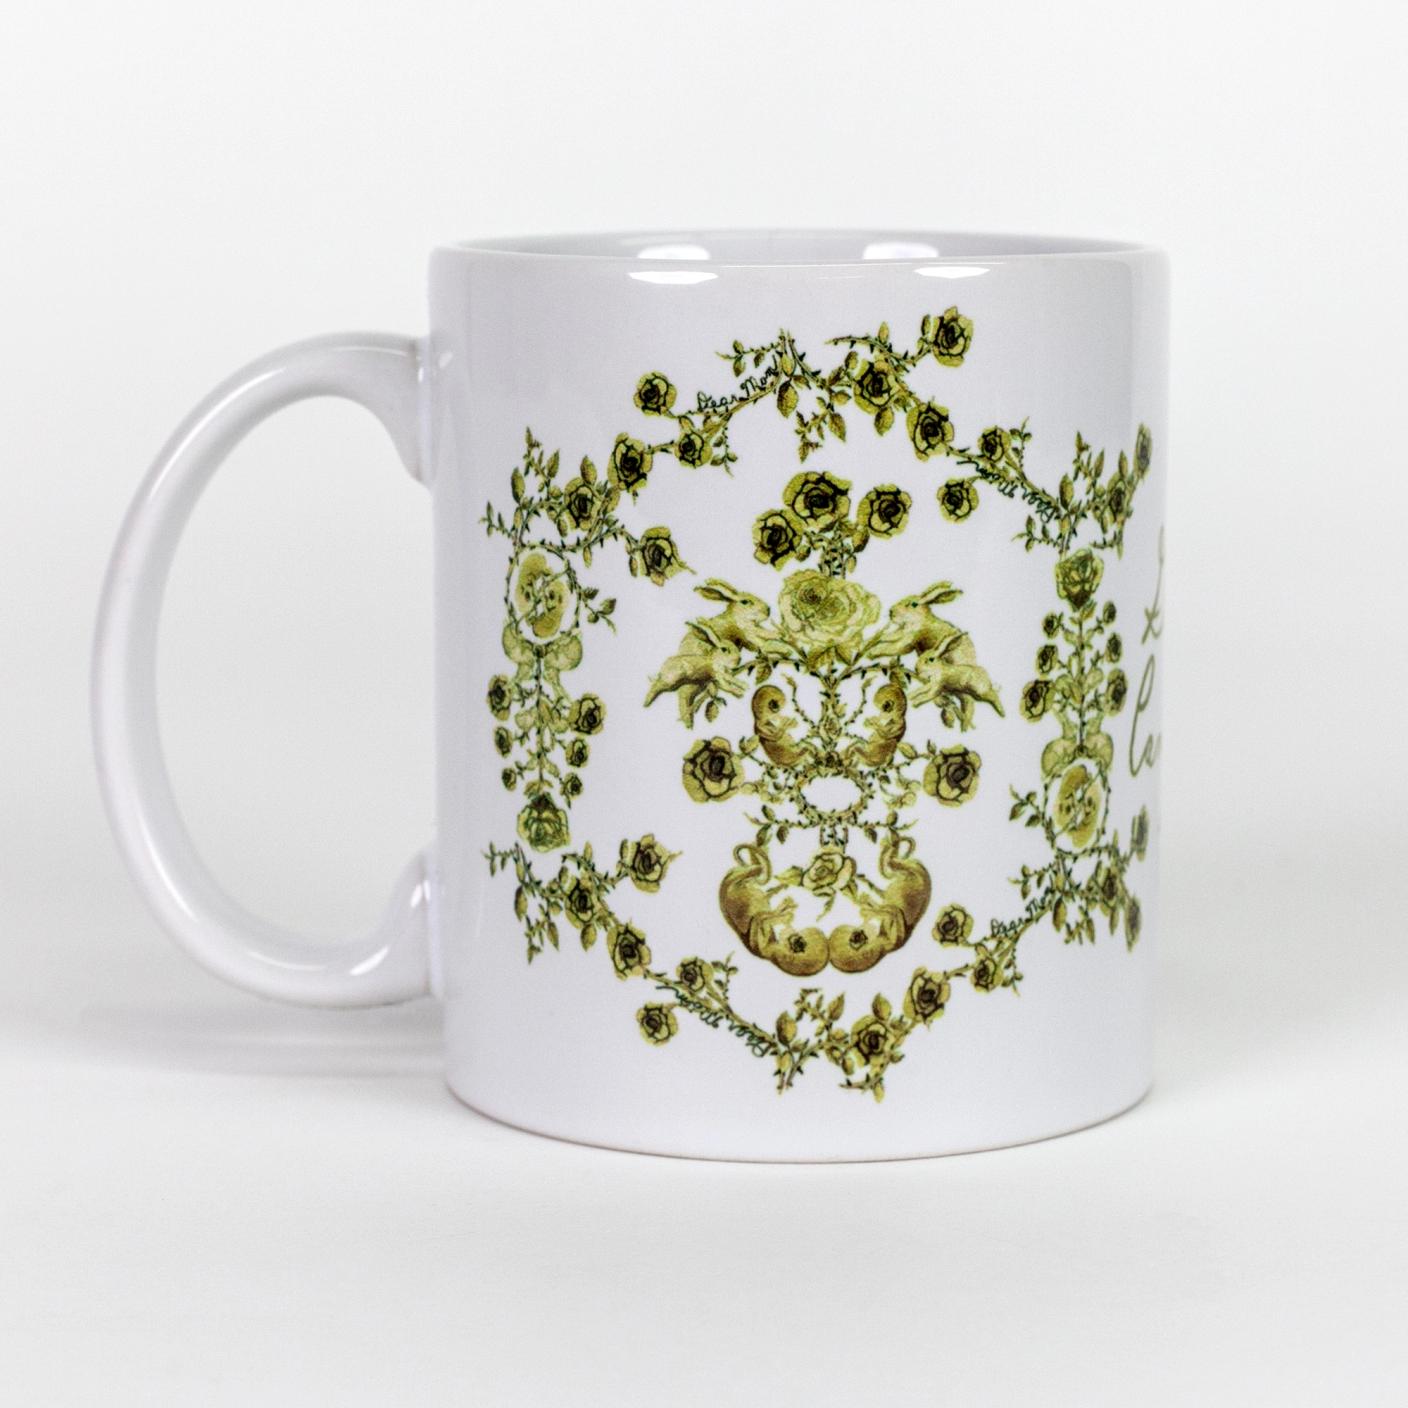 A white ceramic mug featuring a hand illustrated green toile-like pattern made up mostly of roses but also features twin fetuses and rabbits.